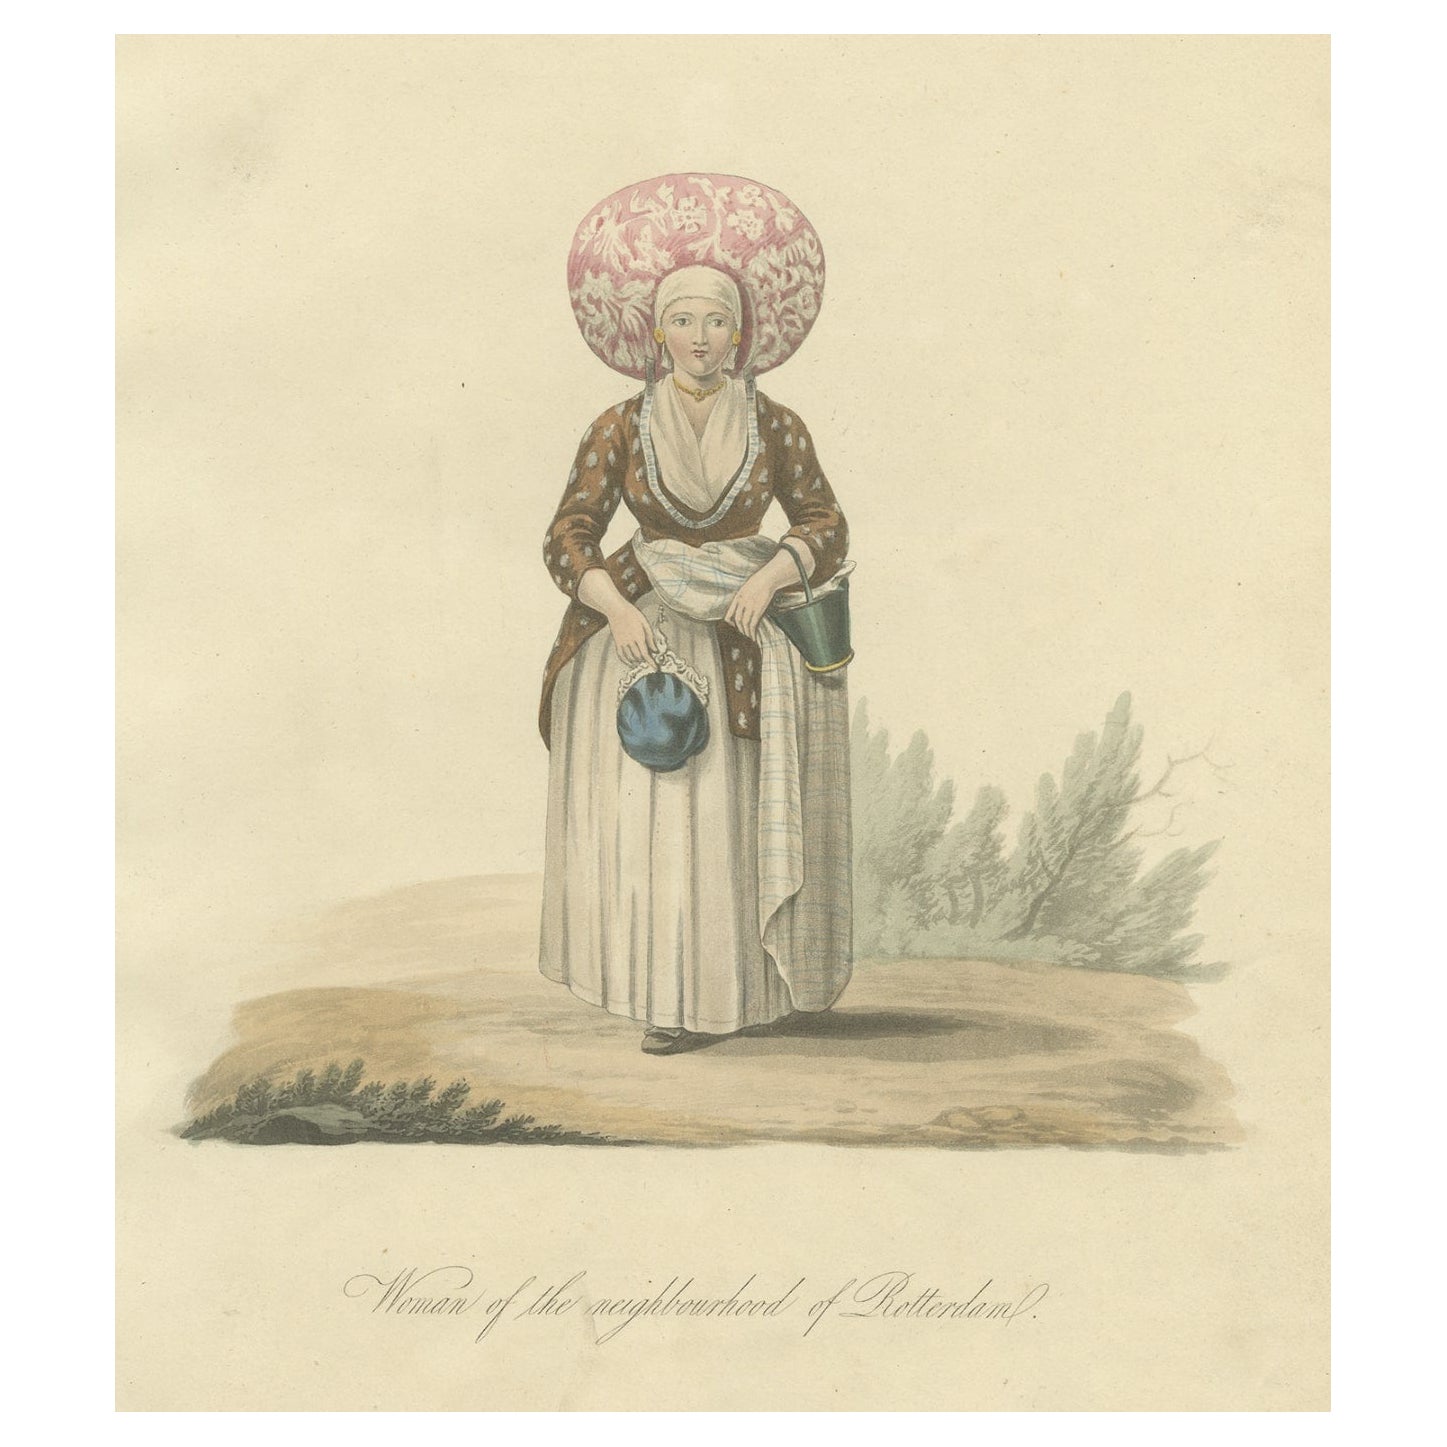 Antique Handcolored Engraving of a woman of the Neighbourhood of Rotterdam, 1817